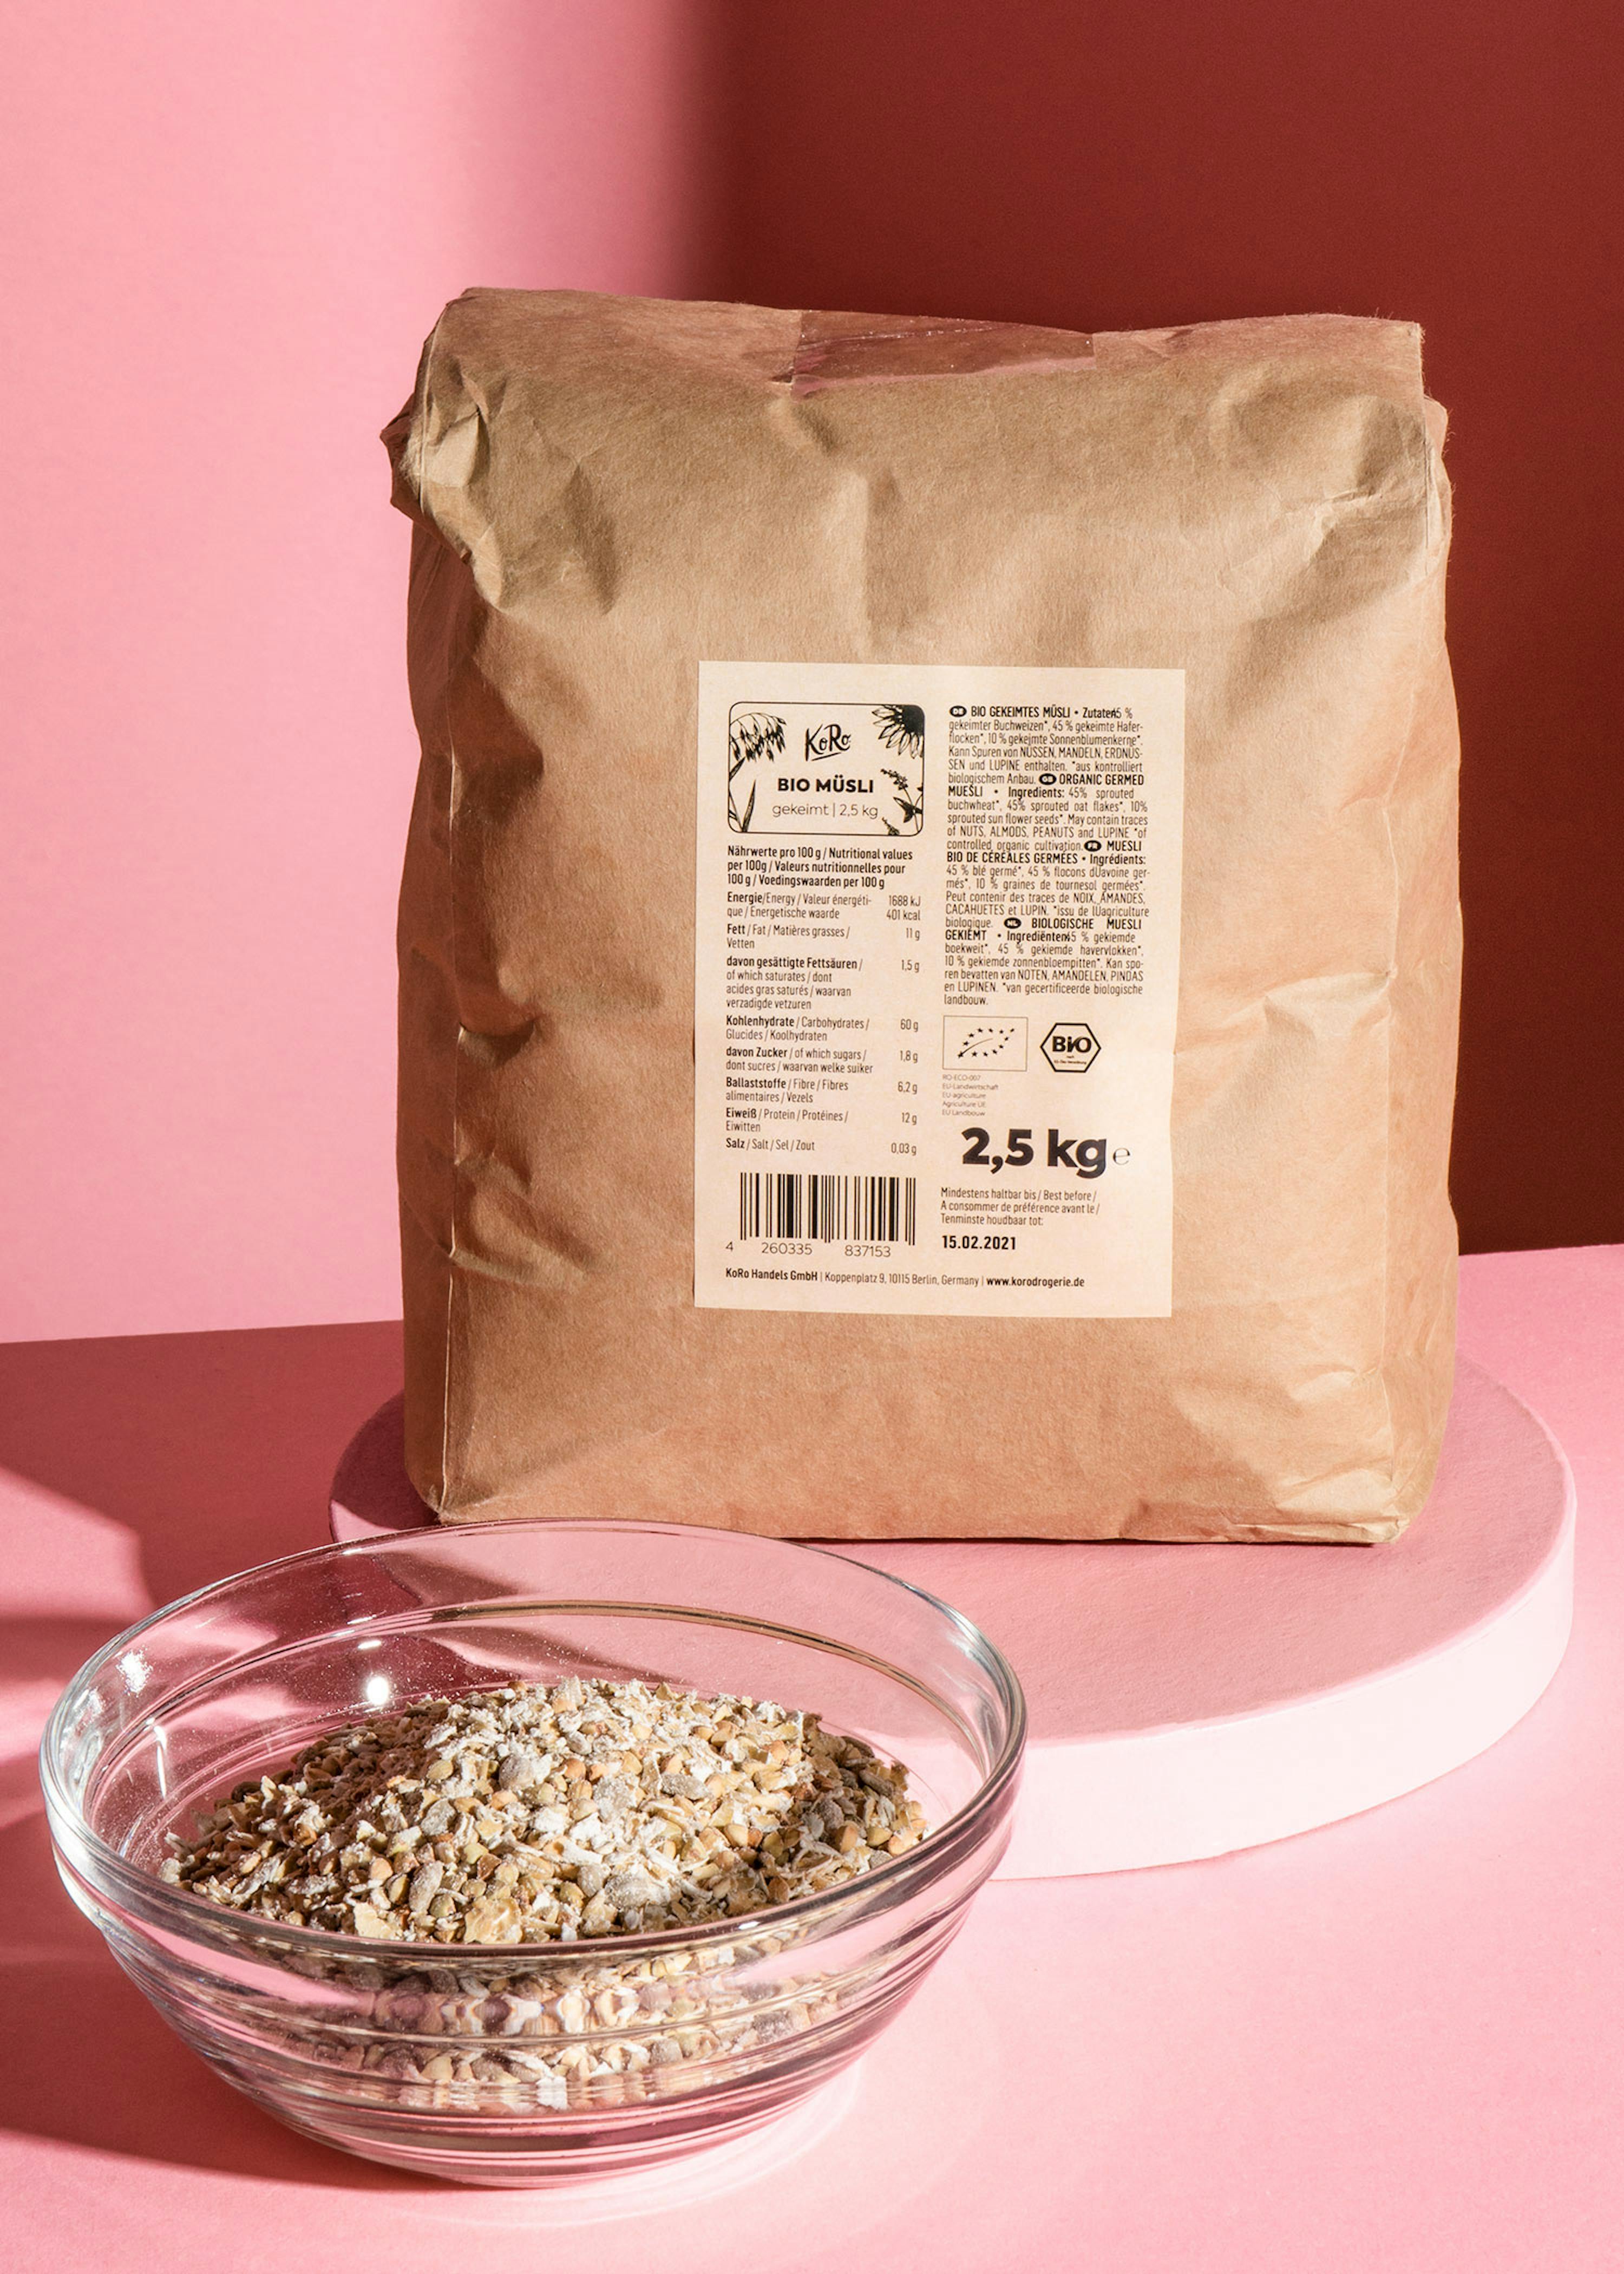 All about sprouted muesli